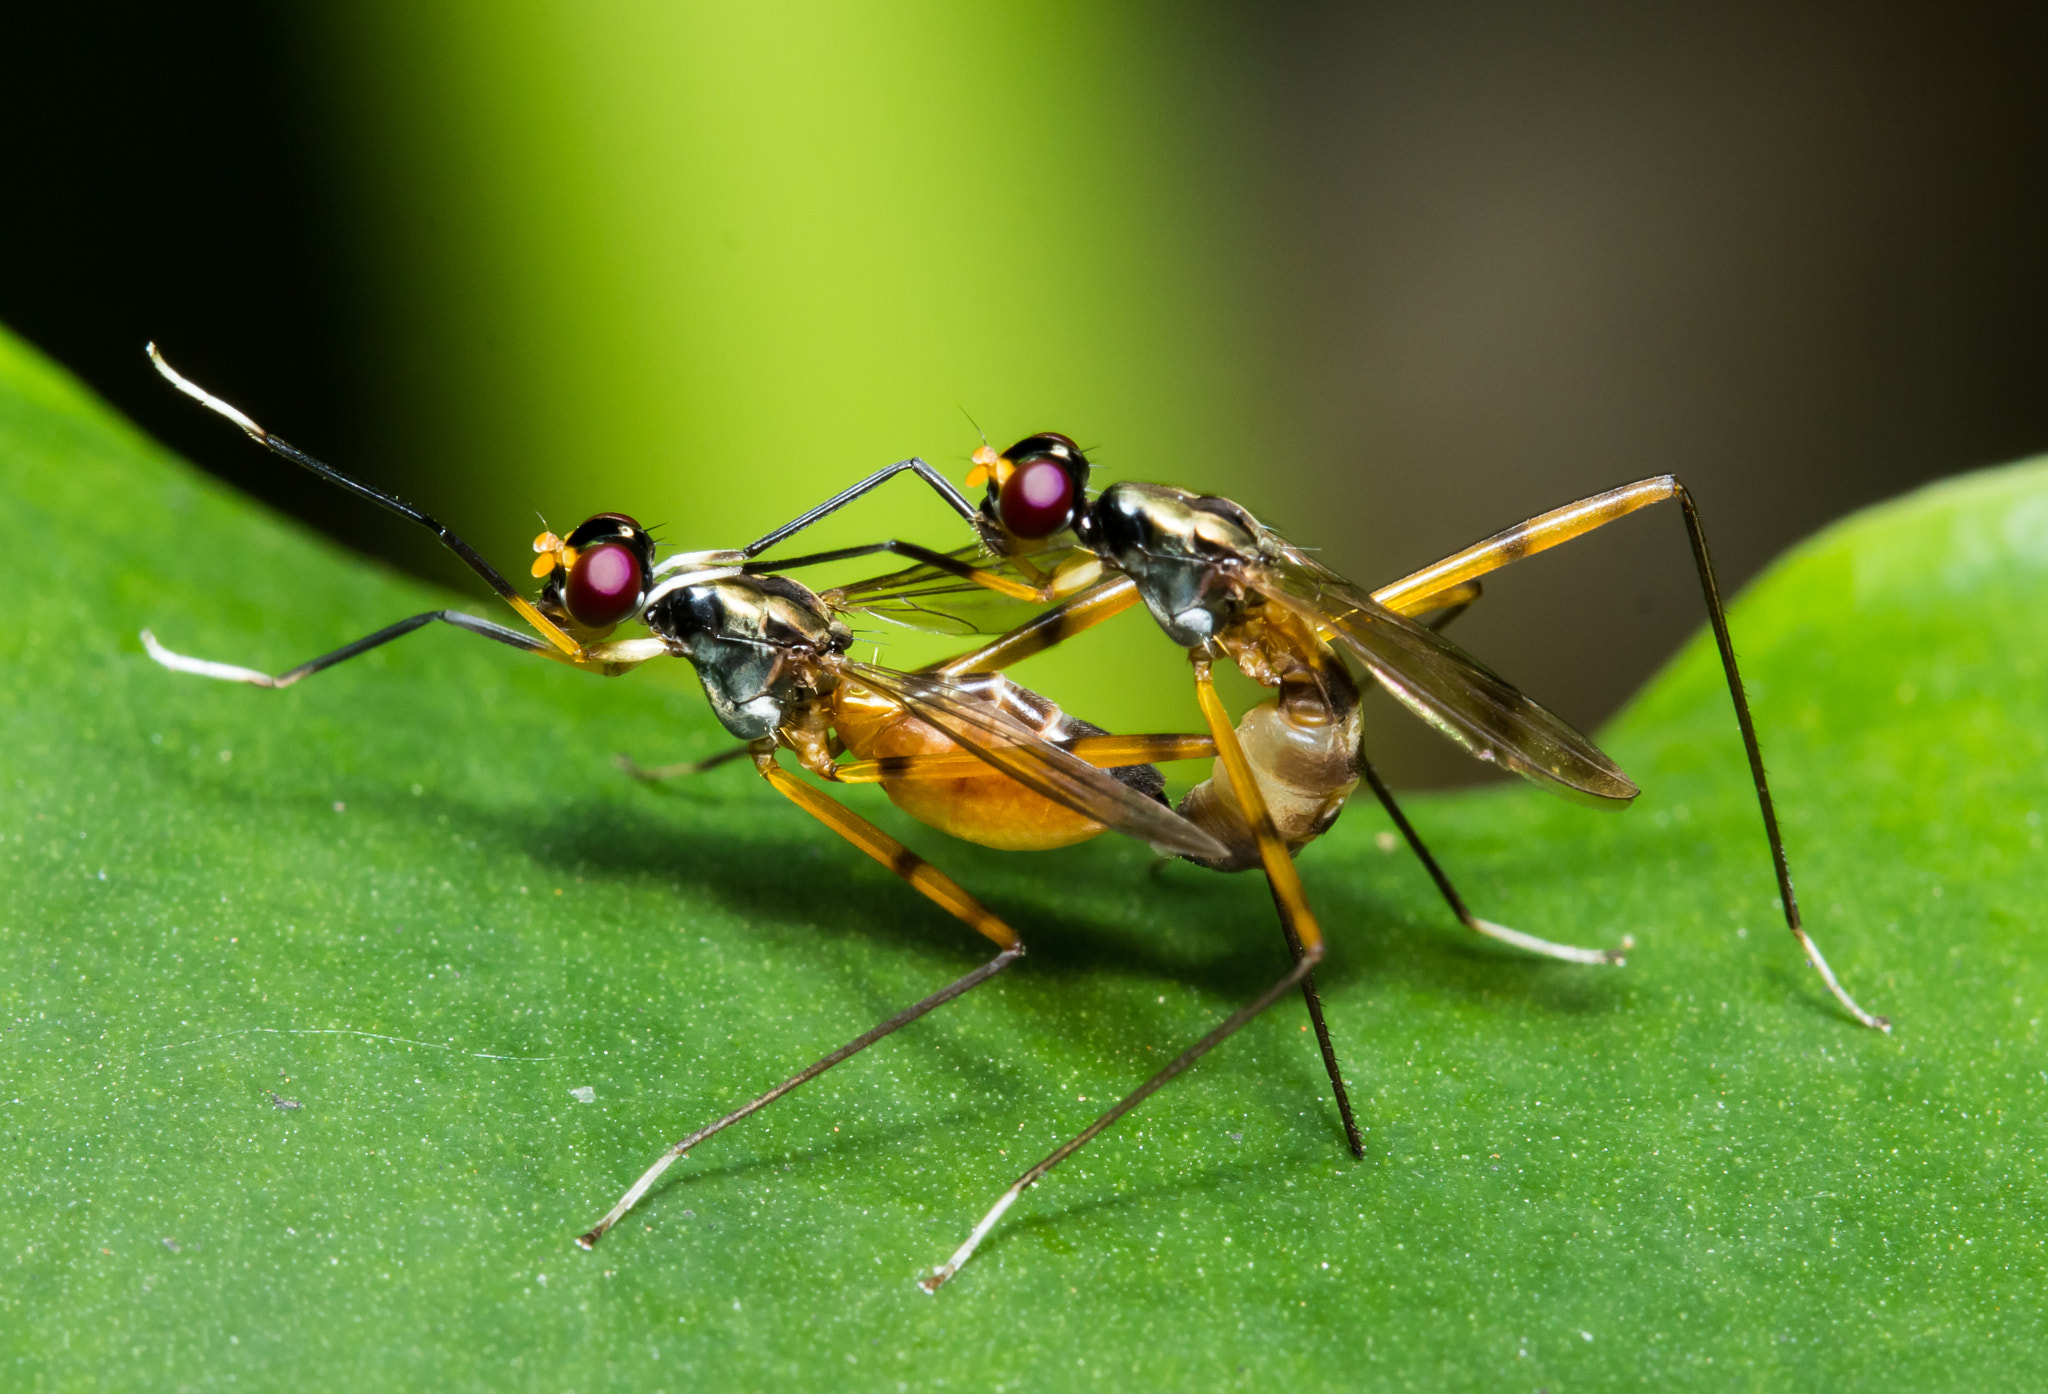  Insects  mating by Shaji Manshad Photo 22876749 500px